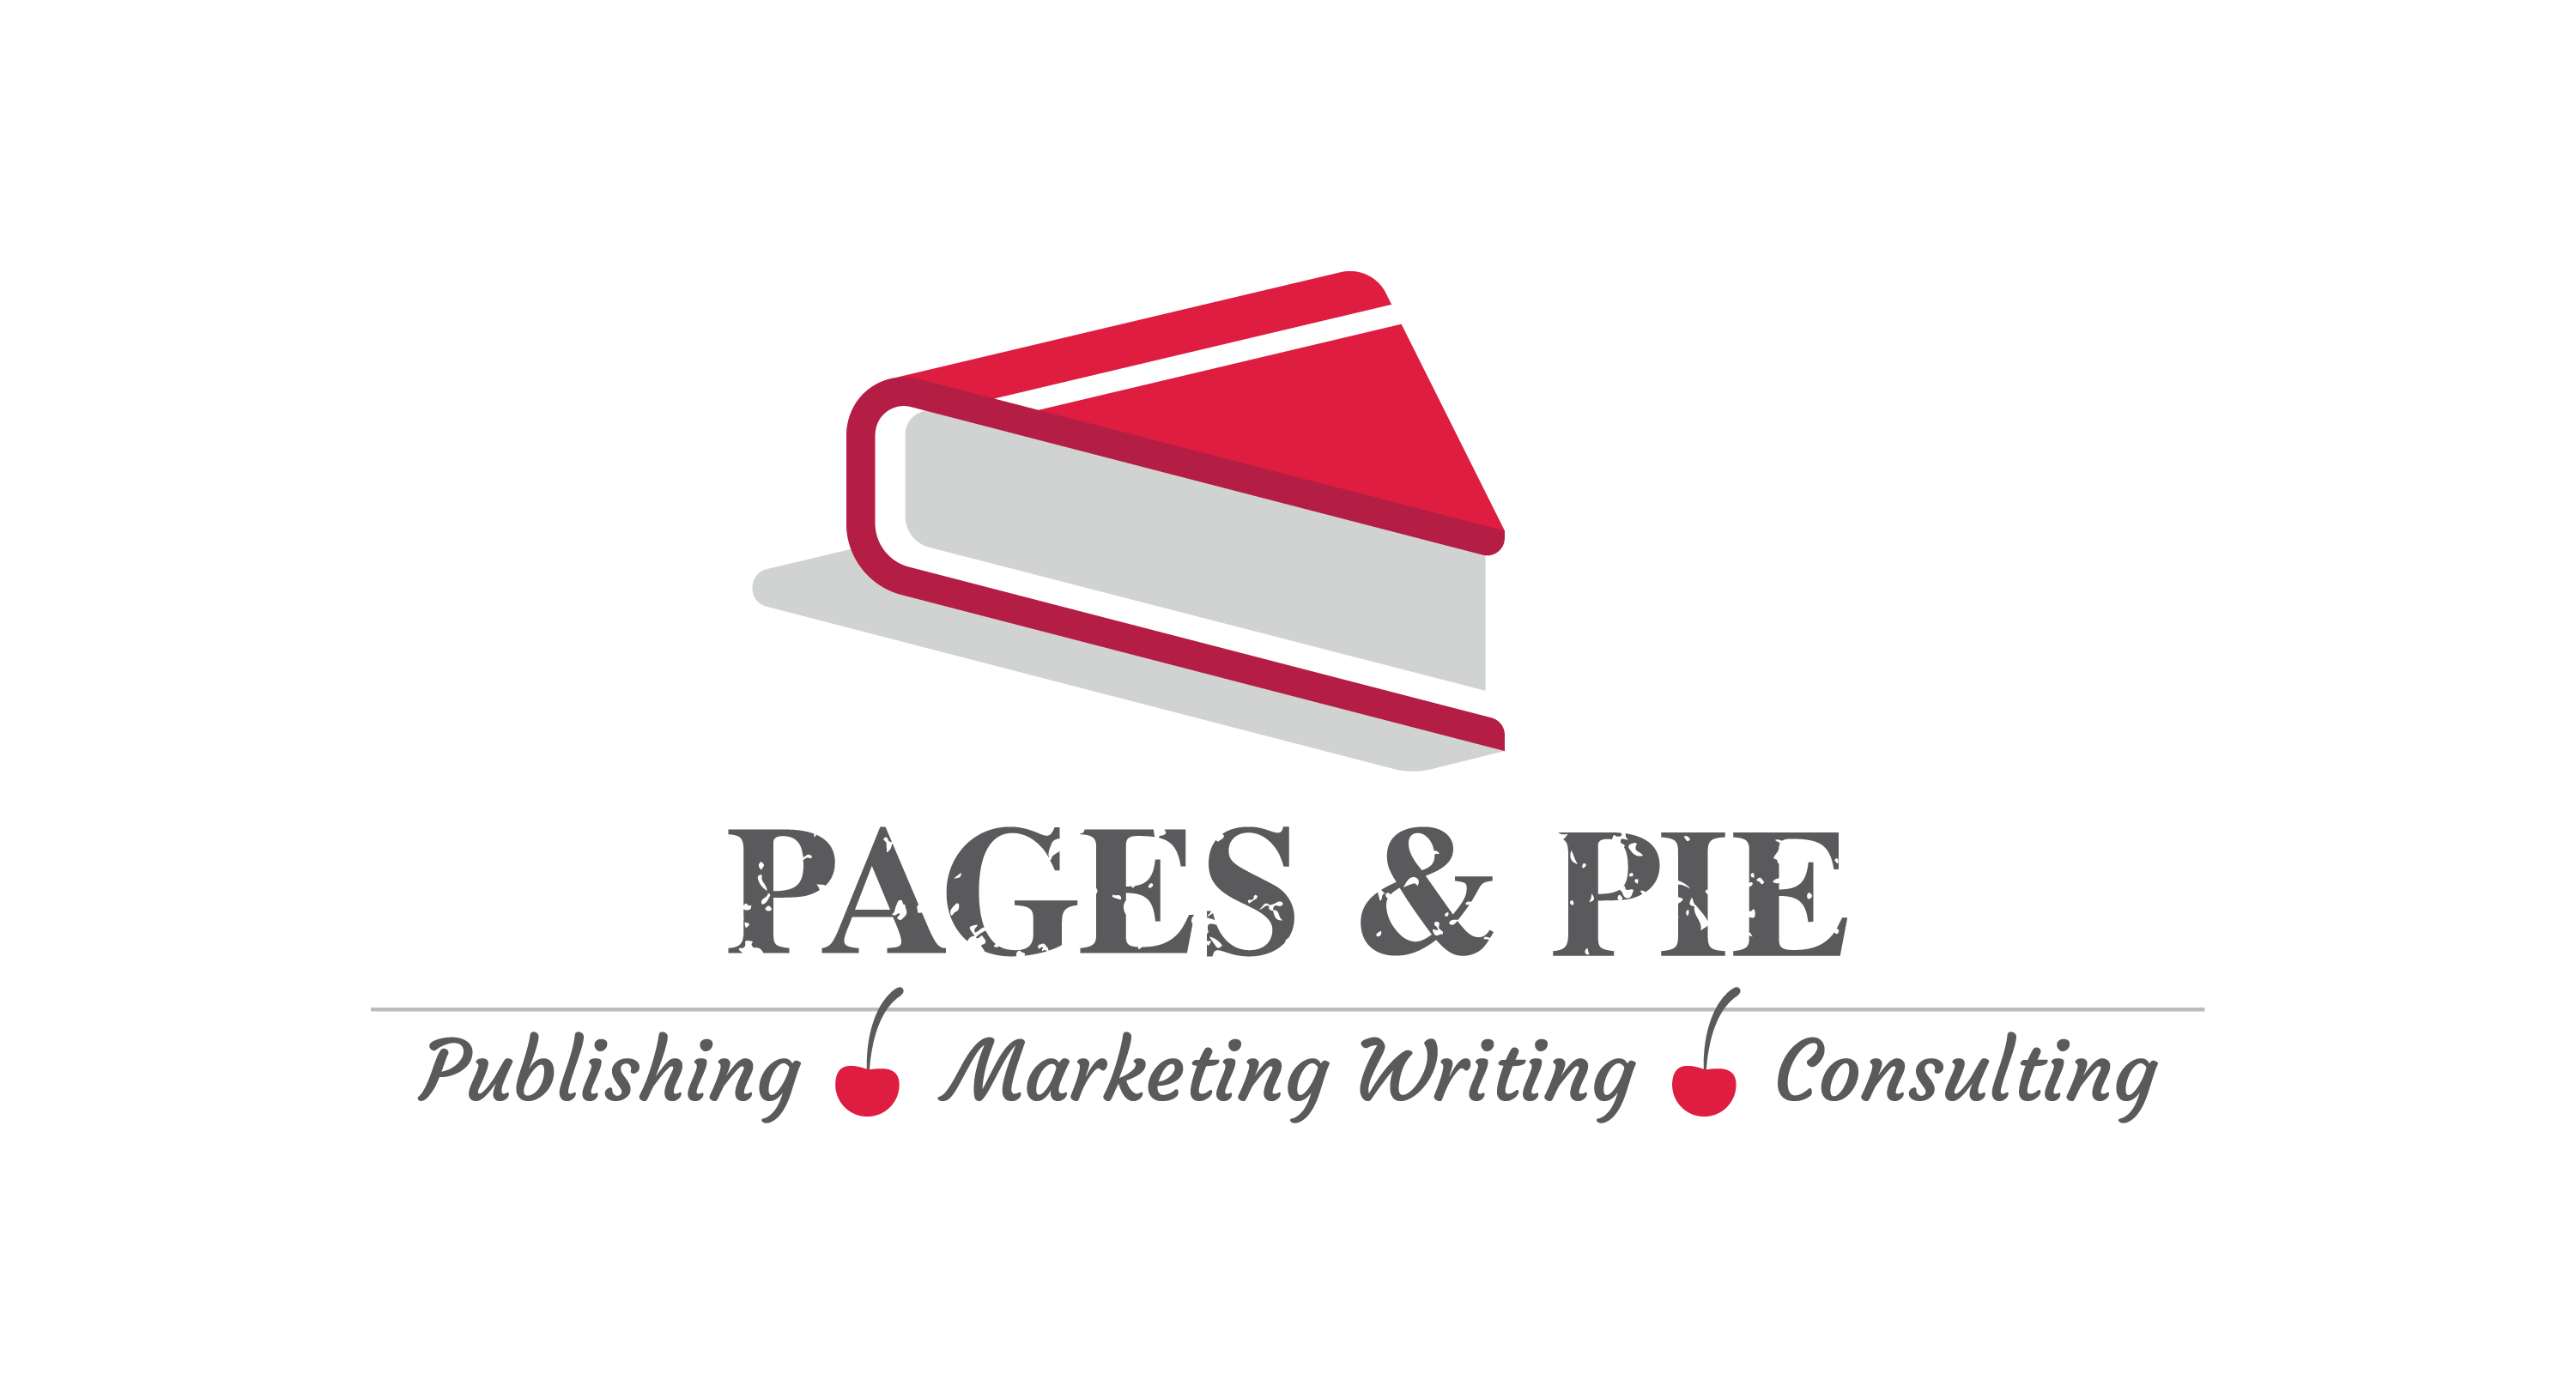 Pages & Pie Publishing